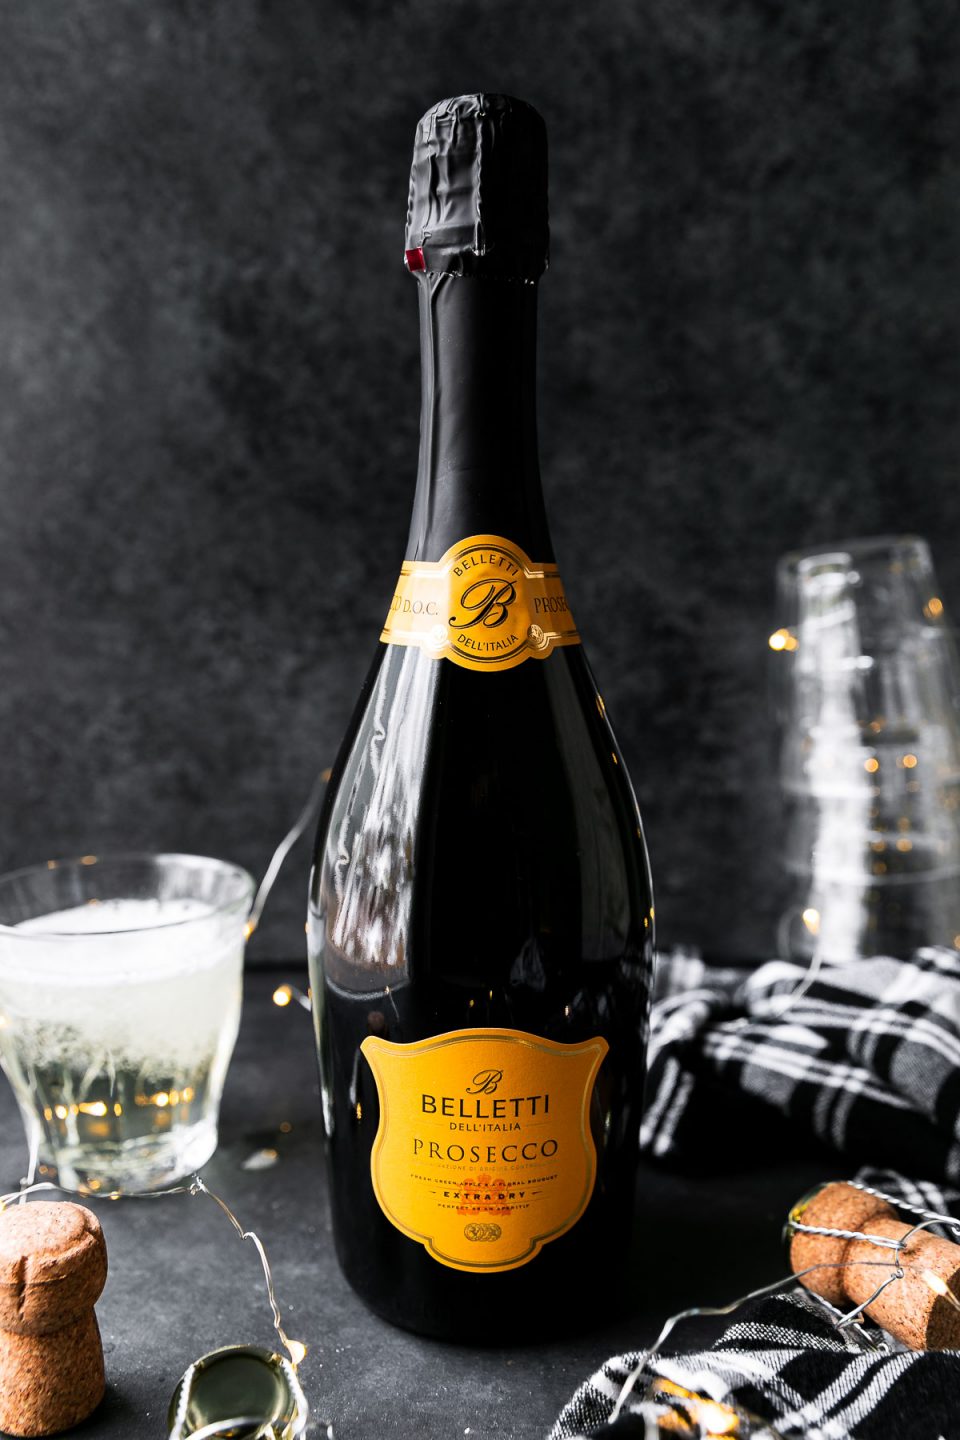 An unopened bottle of Belletti Prosecco from ALDI sits atop a black textured surface in front of a black textured background. A few opened corks, a string of twinkling lights, a clear glass filled with Prosecco, a black and white plaid linen napkin, and a stack of upside-down glasses surround the bottle.